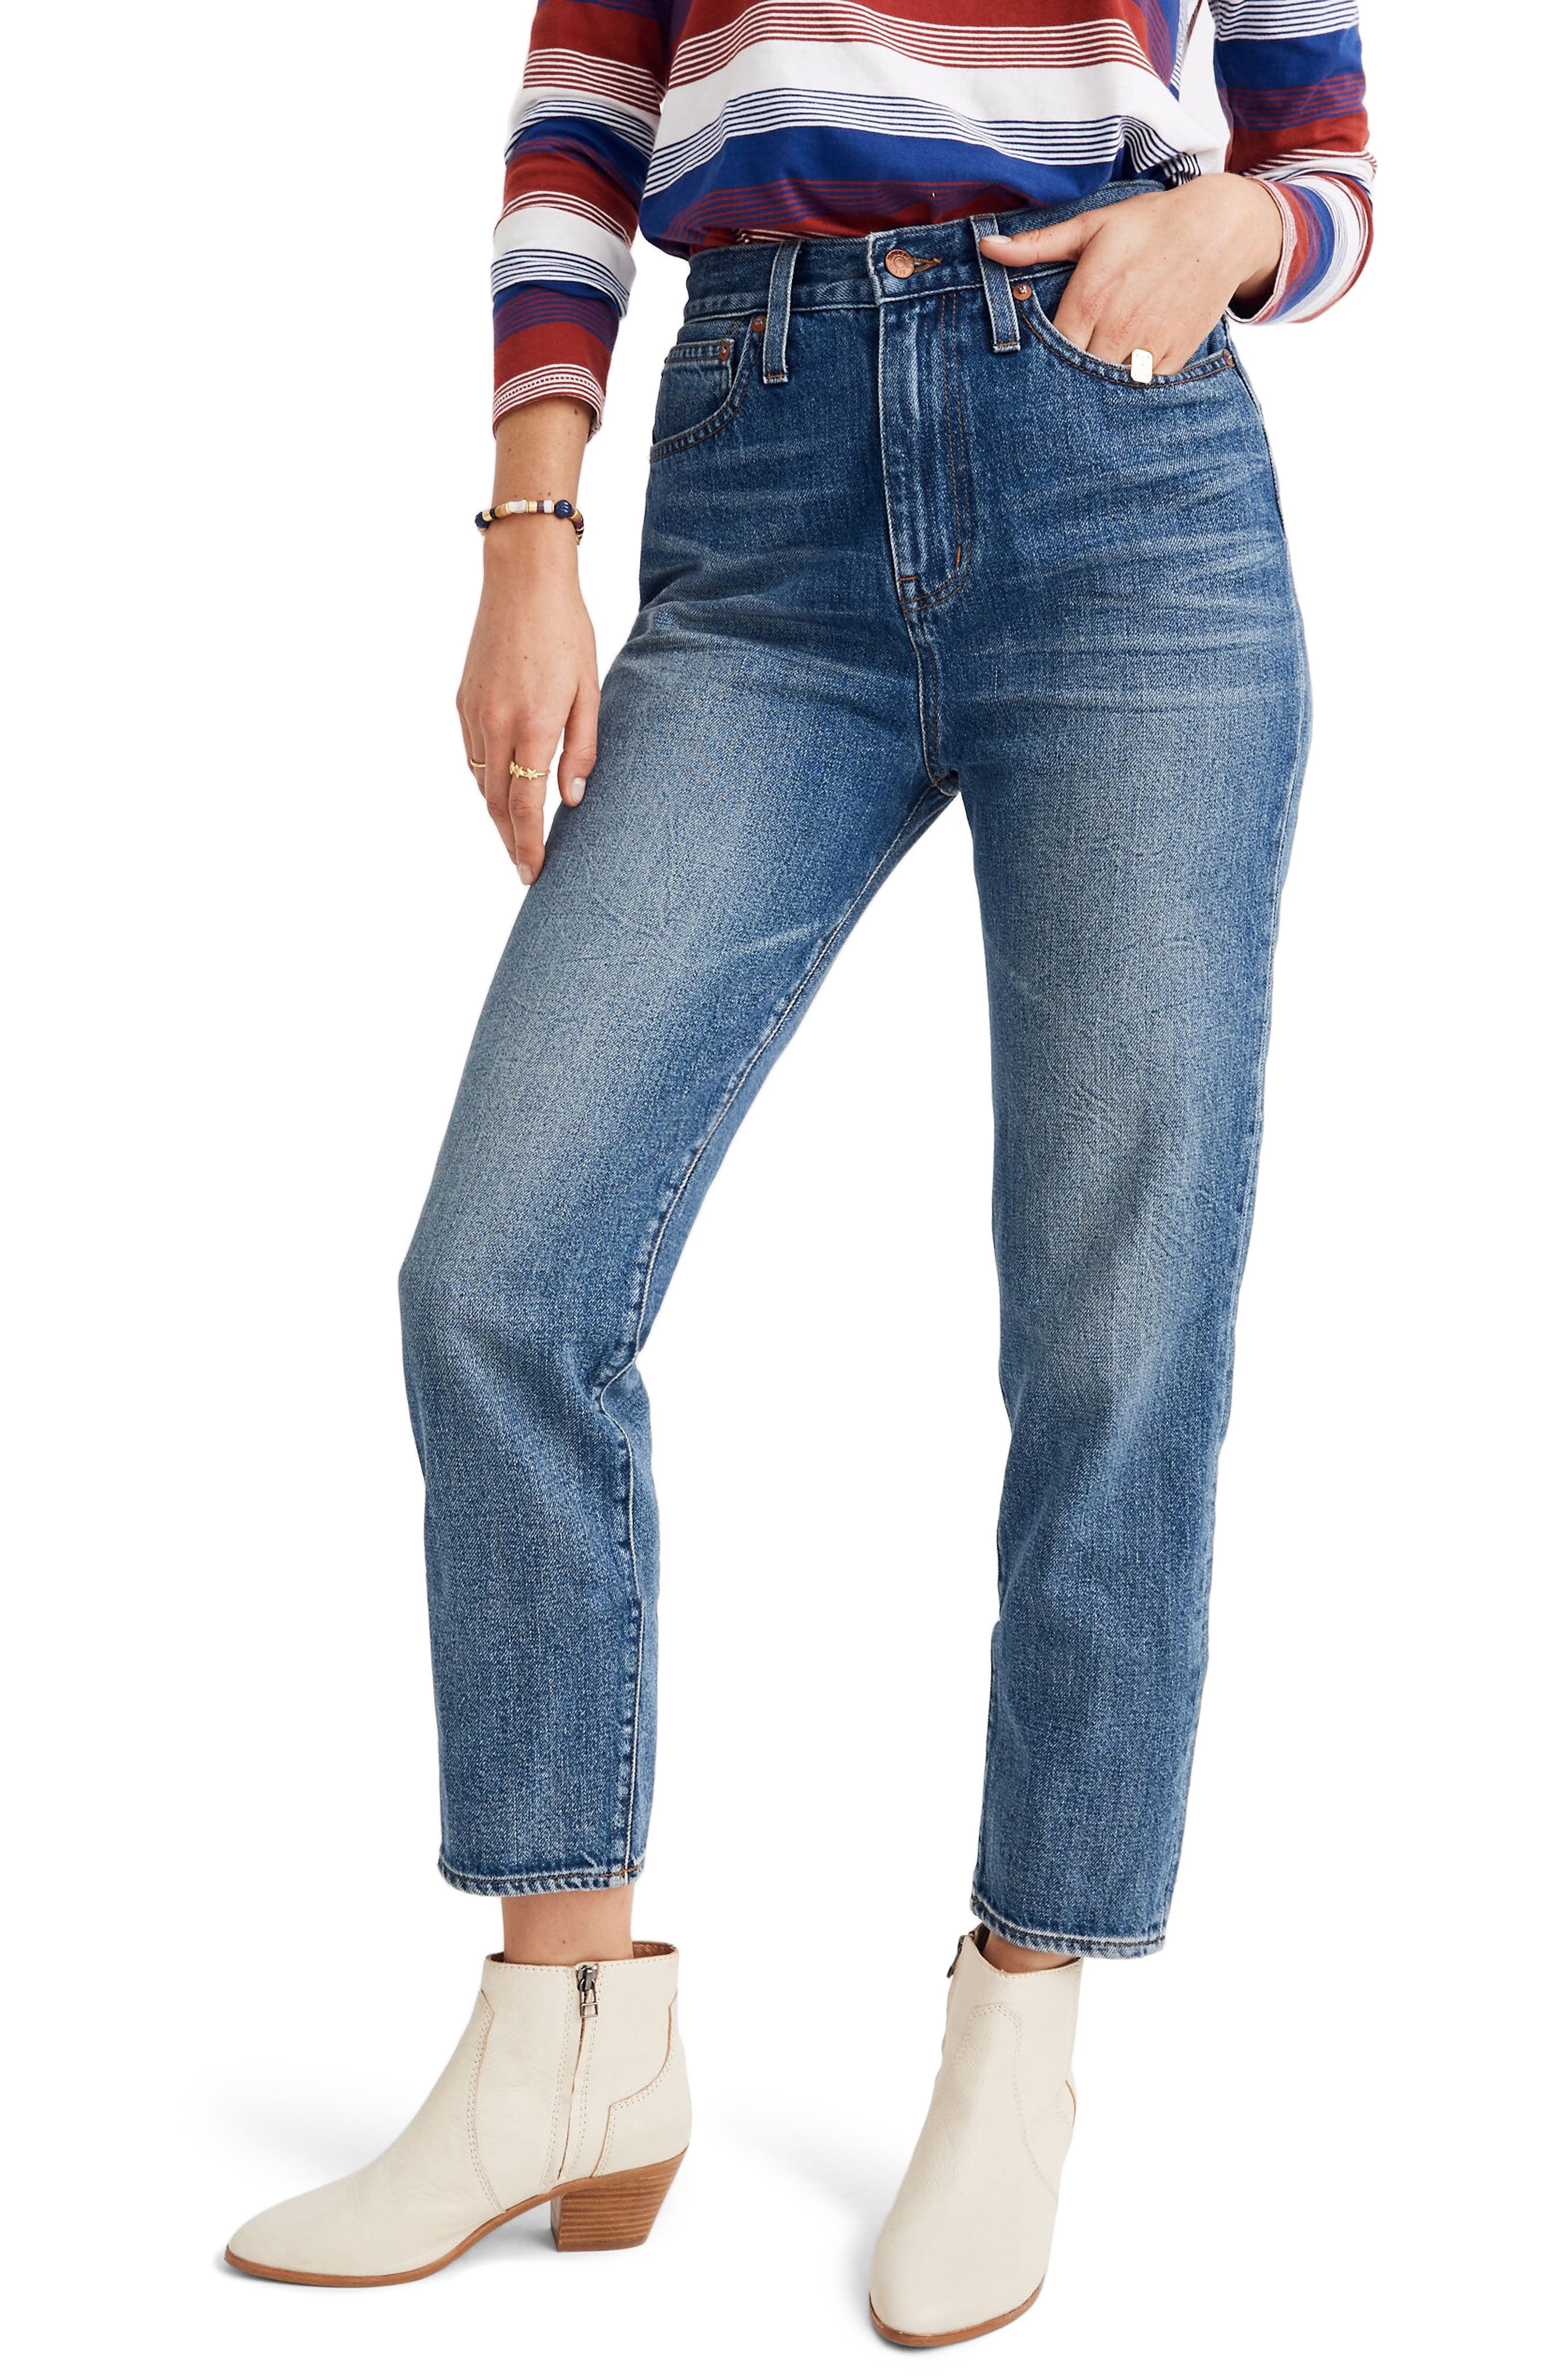 madewell jean policy